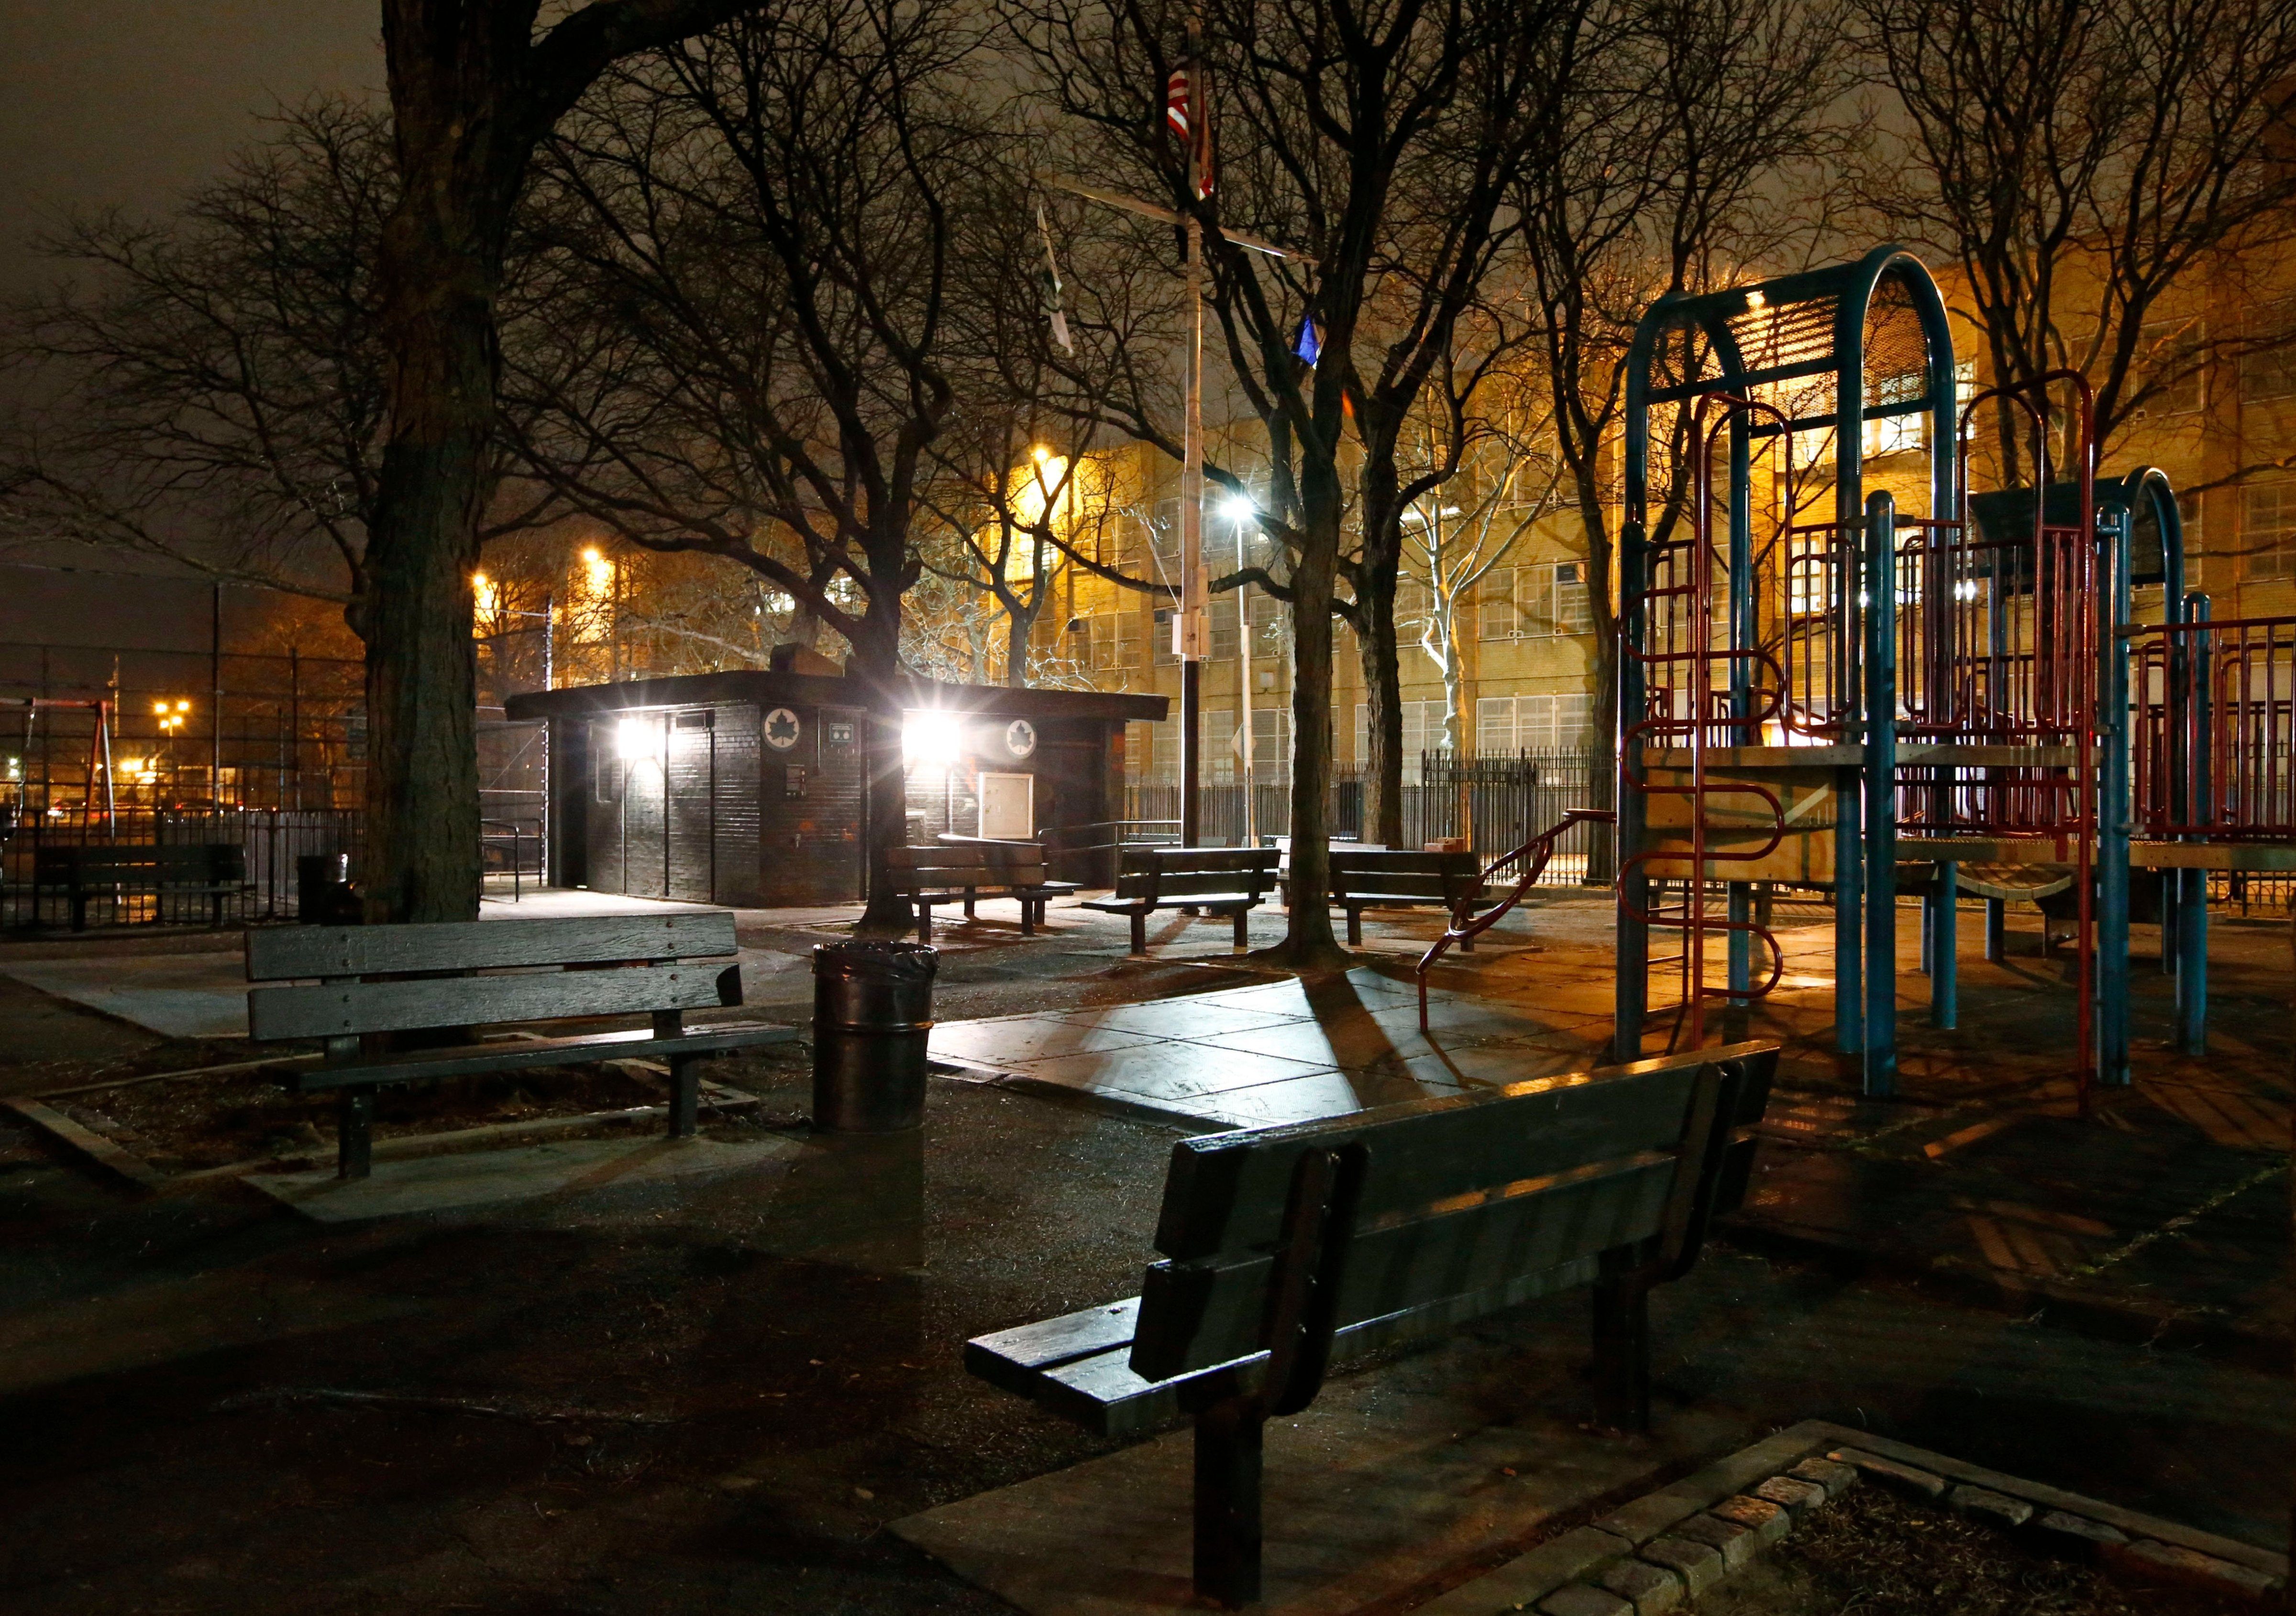 New floodlight-style lighting has been installed at Osborn Playground in the Brooklyn borough of New York, on Jan. 14, 2016. (Kathy Willens—AP)